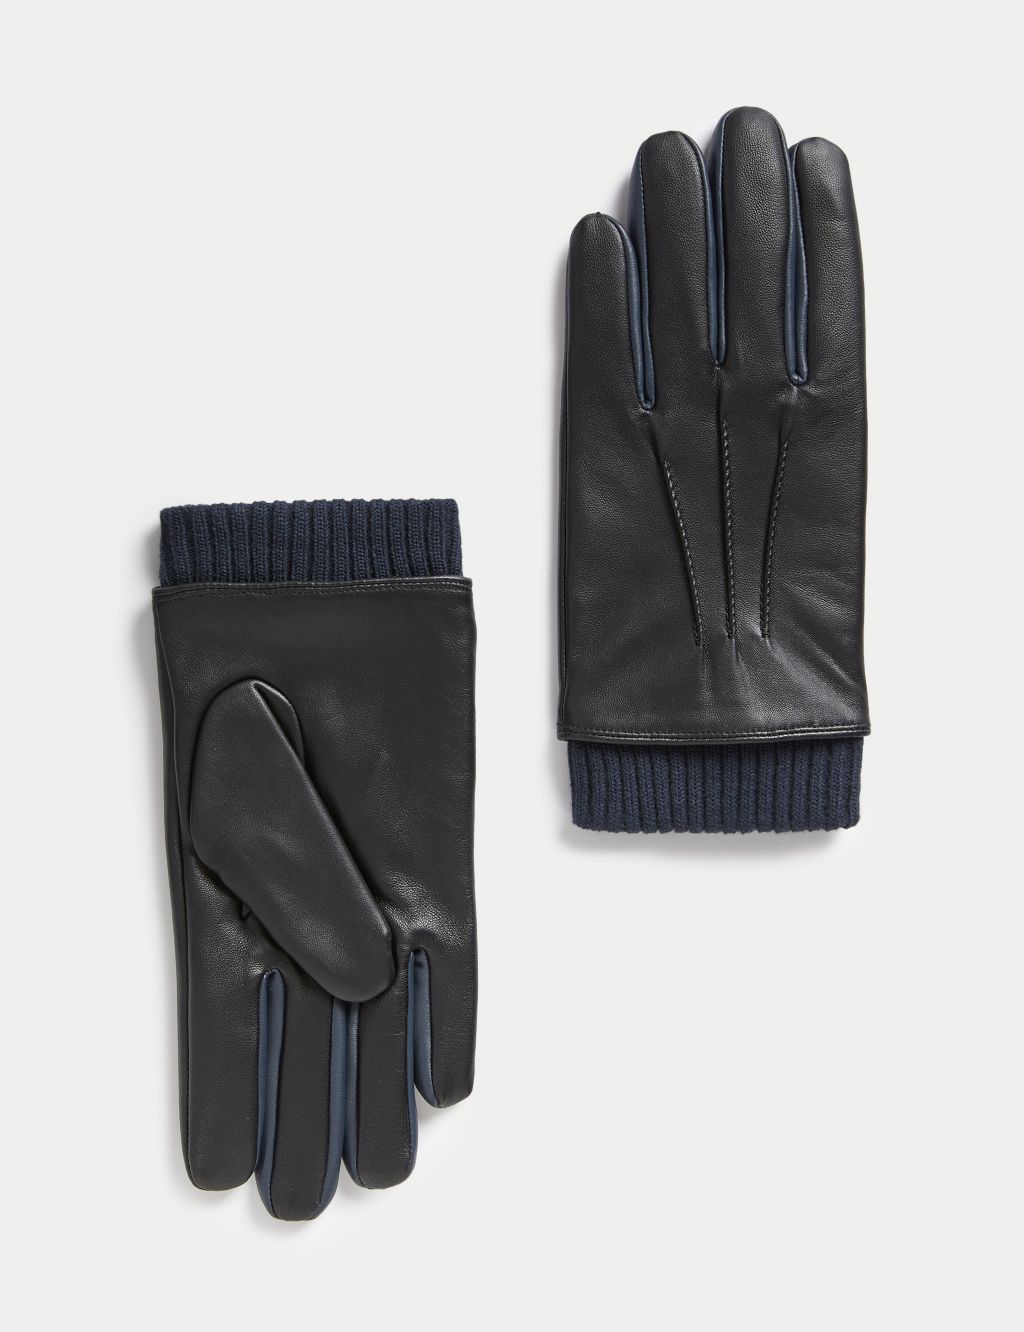 Leather Colour Block Gloves image 1